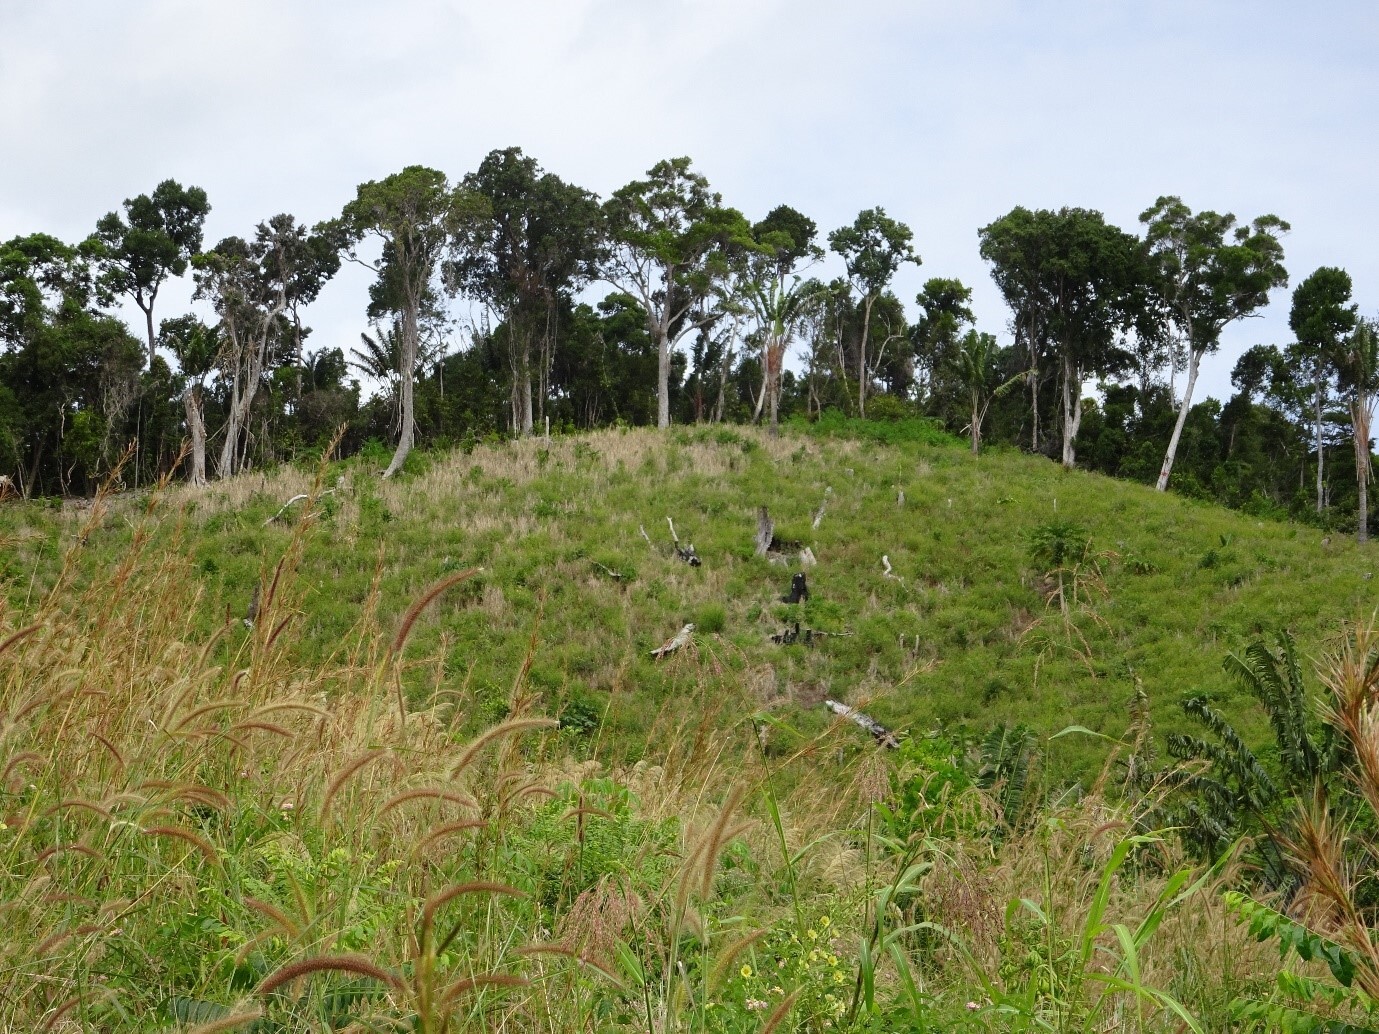 Primary forests in northeast Madagascar (background) are irreplaceable for many endemic species and ecosystem services, as the study clearly shows. Vanilla agroforests could be a profitable alternative to burning down primary forests thanks to low land consumption, but only if they are not established in forests themselves.